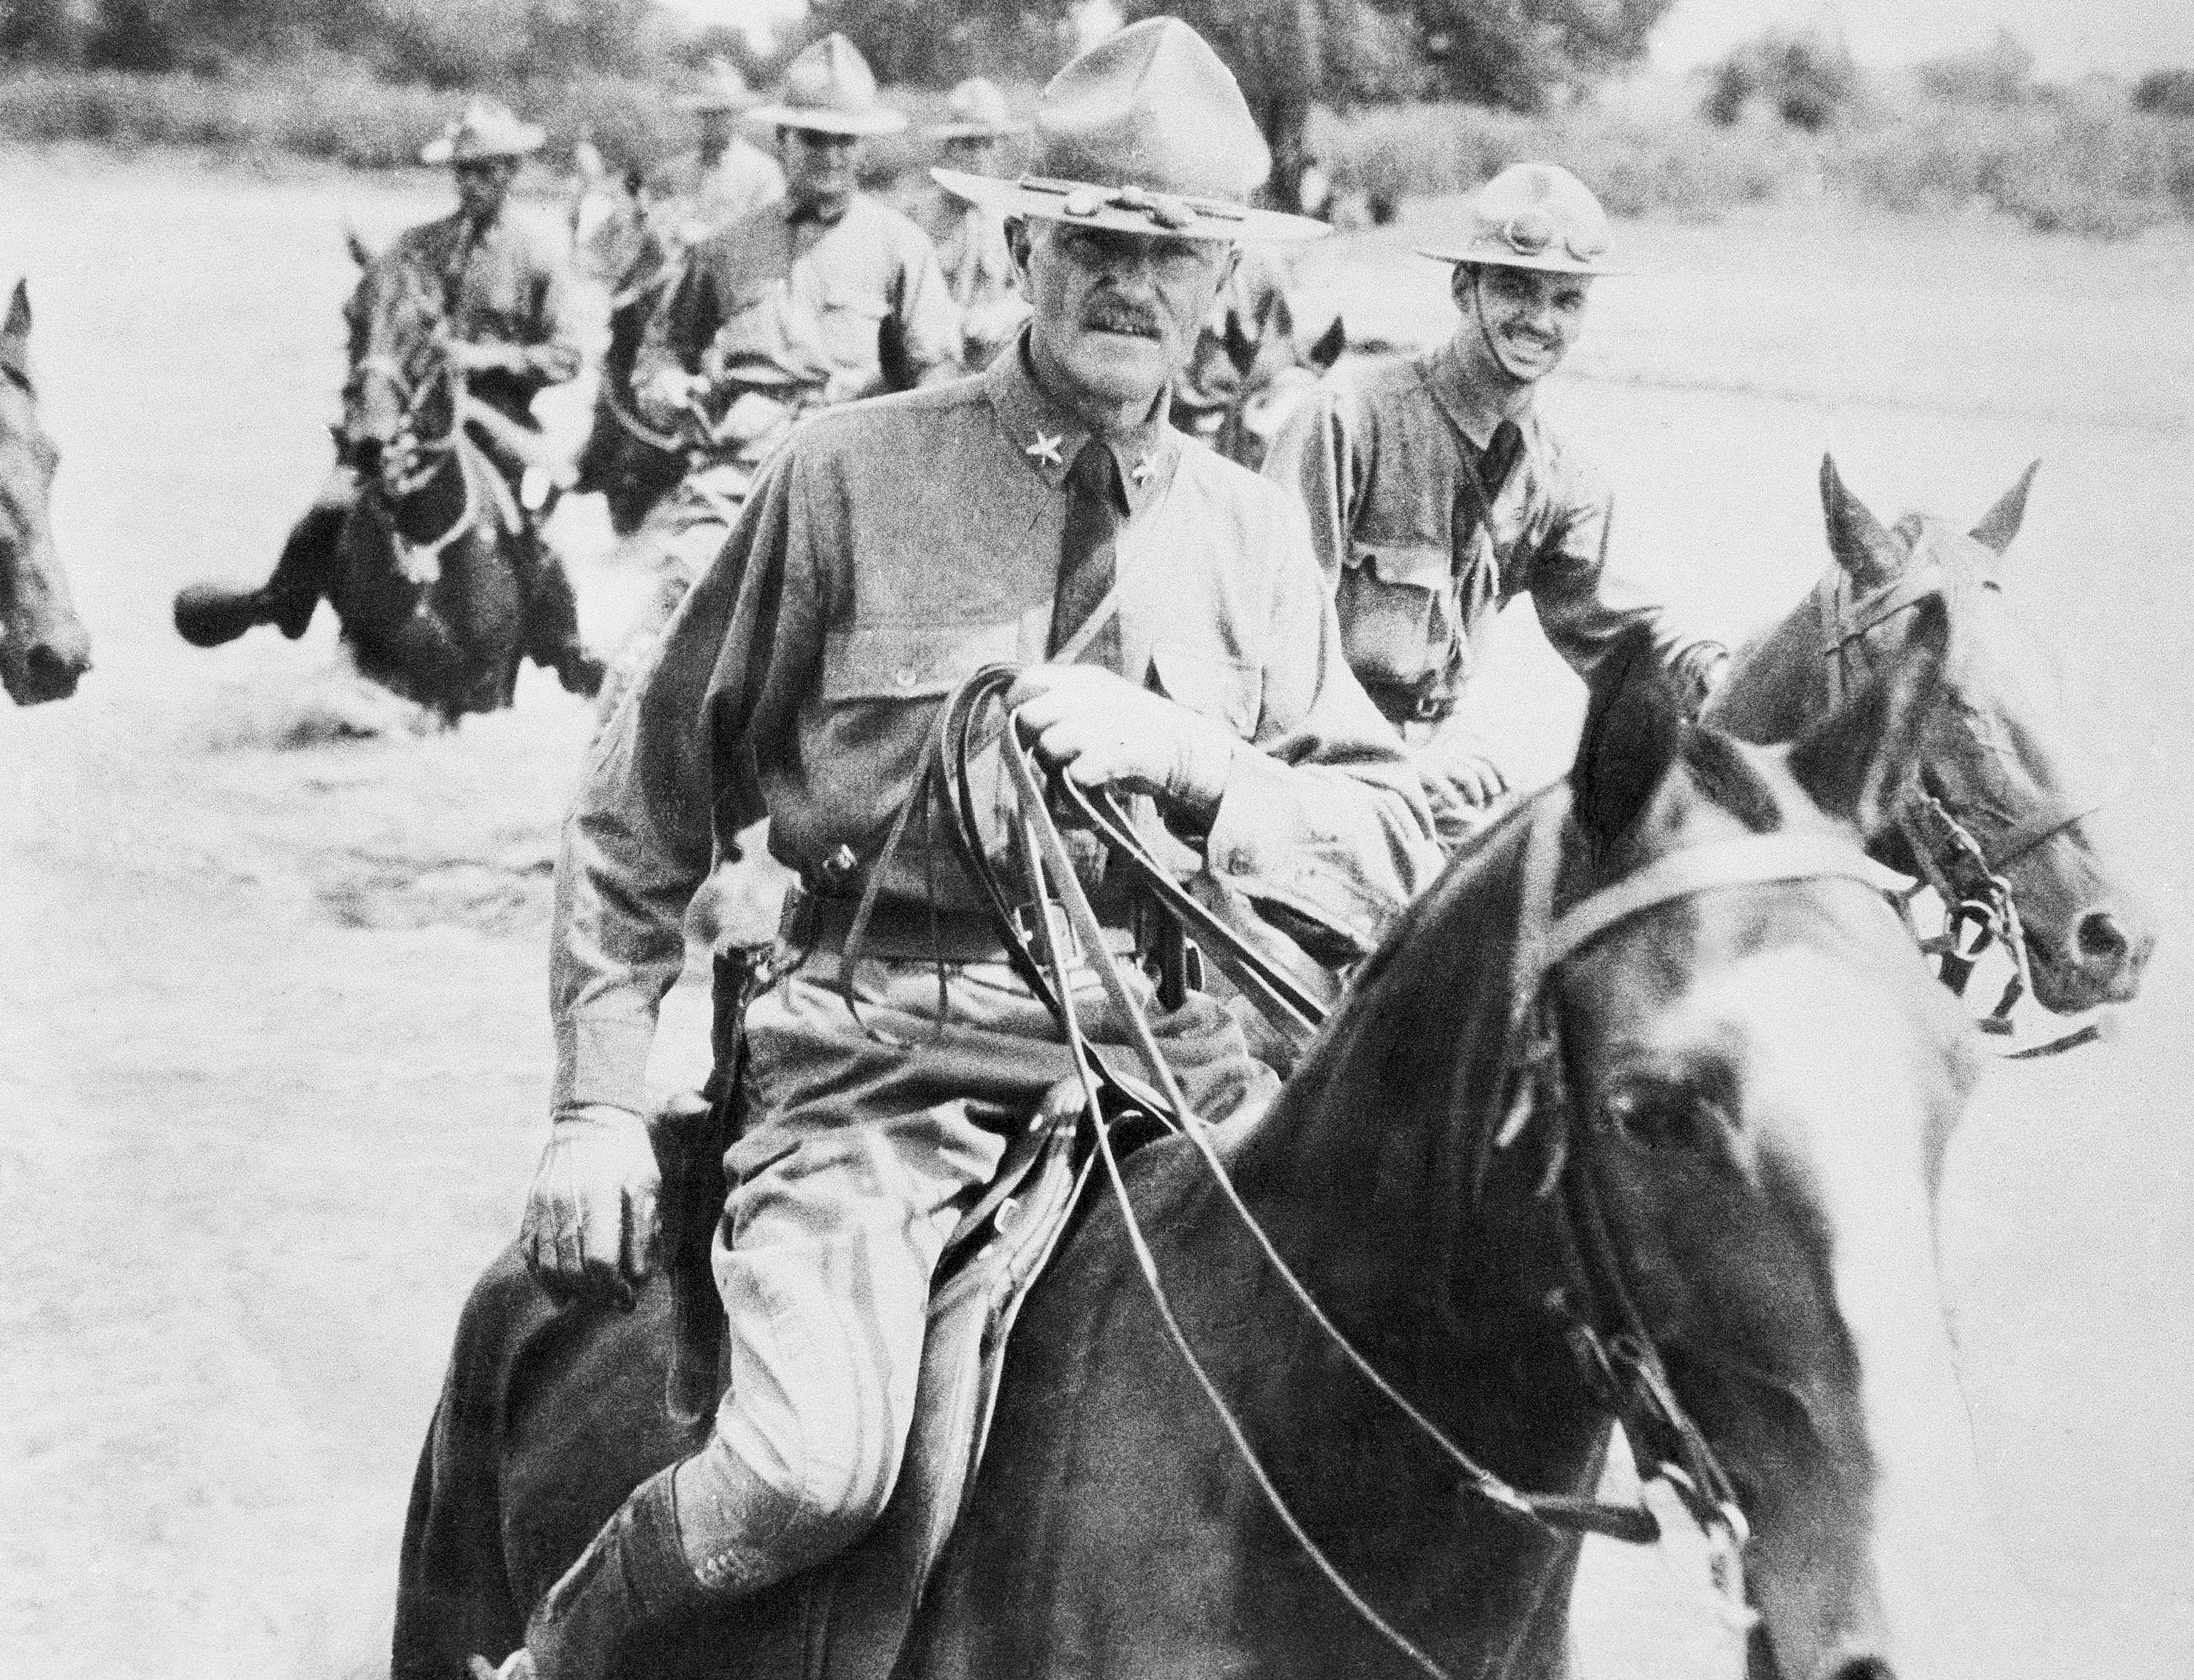 Today in history: Pershing rides into Mexico to look for Pancho Villa, in 1916.